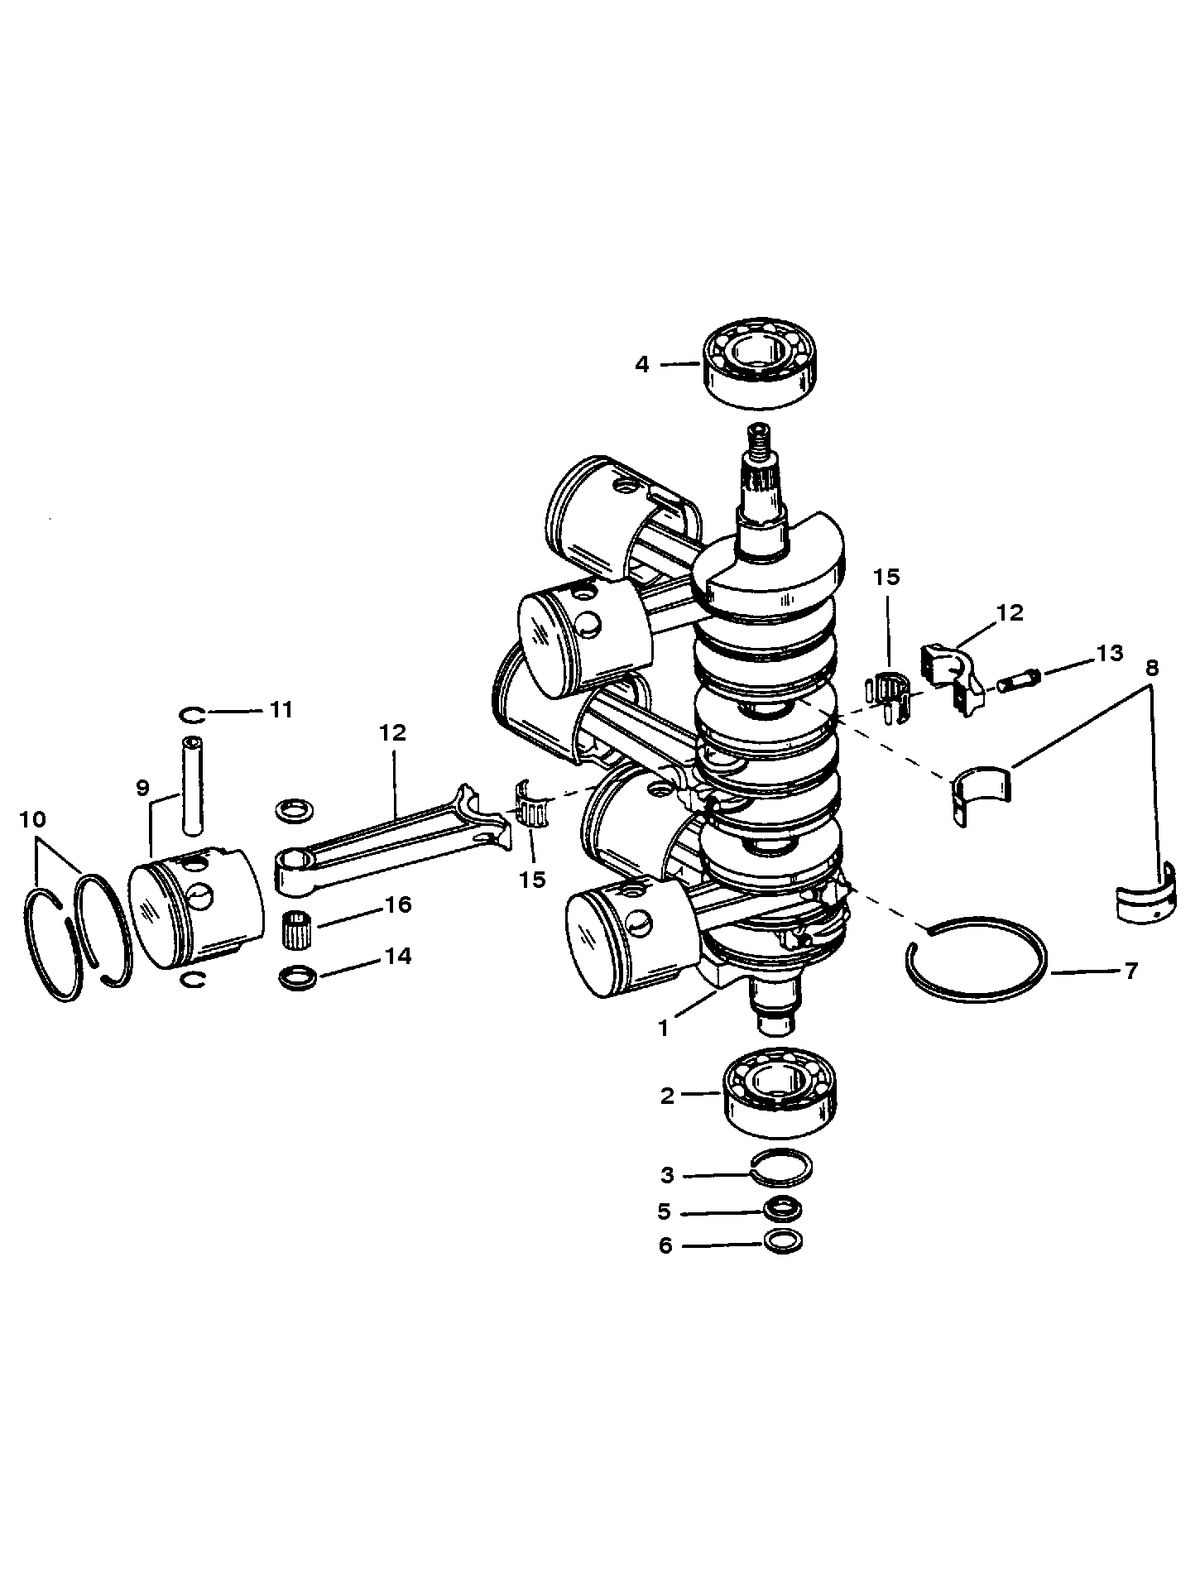 RACE OUTBOARD 2.5L (EFI) 2.5L (EFI-OFFSHORE) CRANKSHAFT, PISTONS, AND CONNECTING RODS